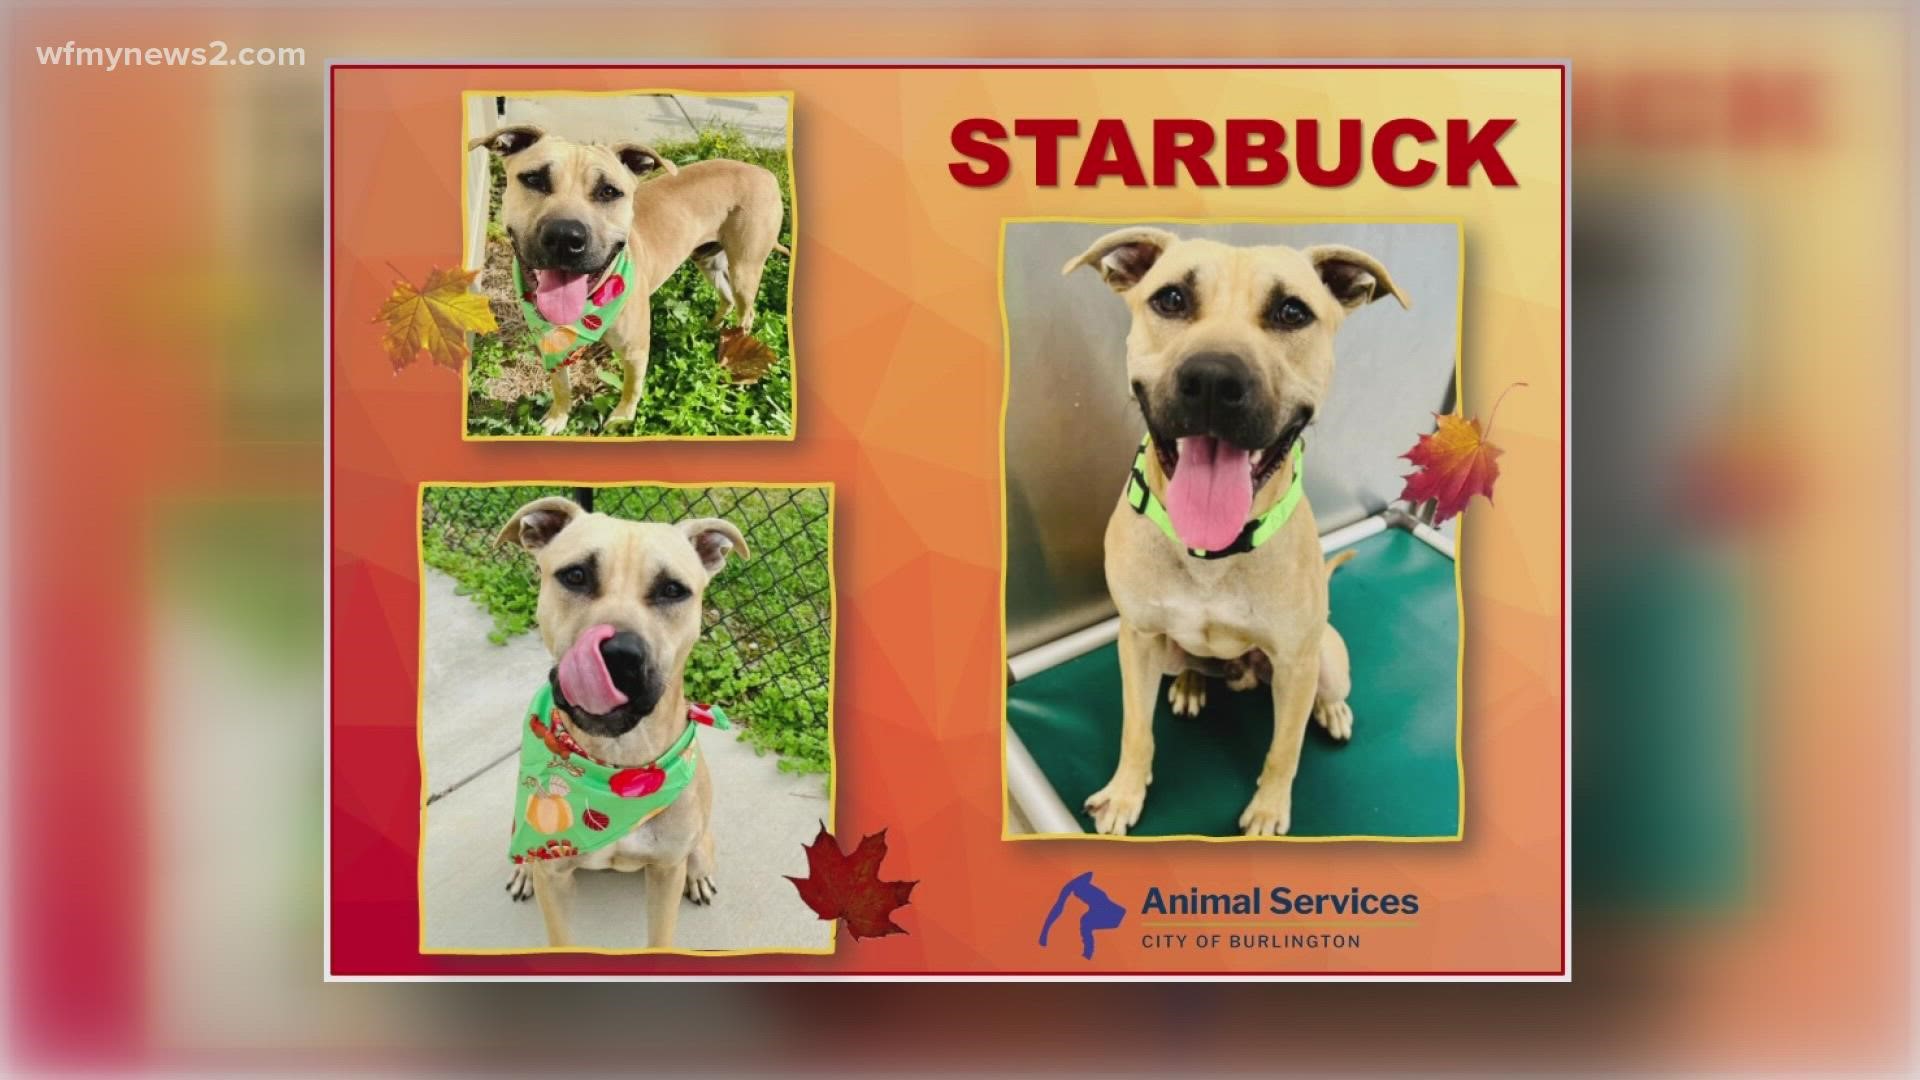 Let's get Starbuck adopted!